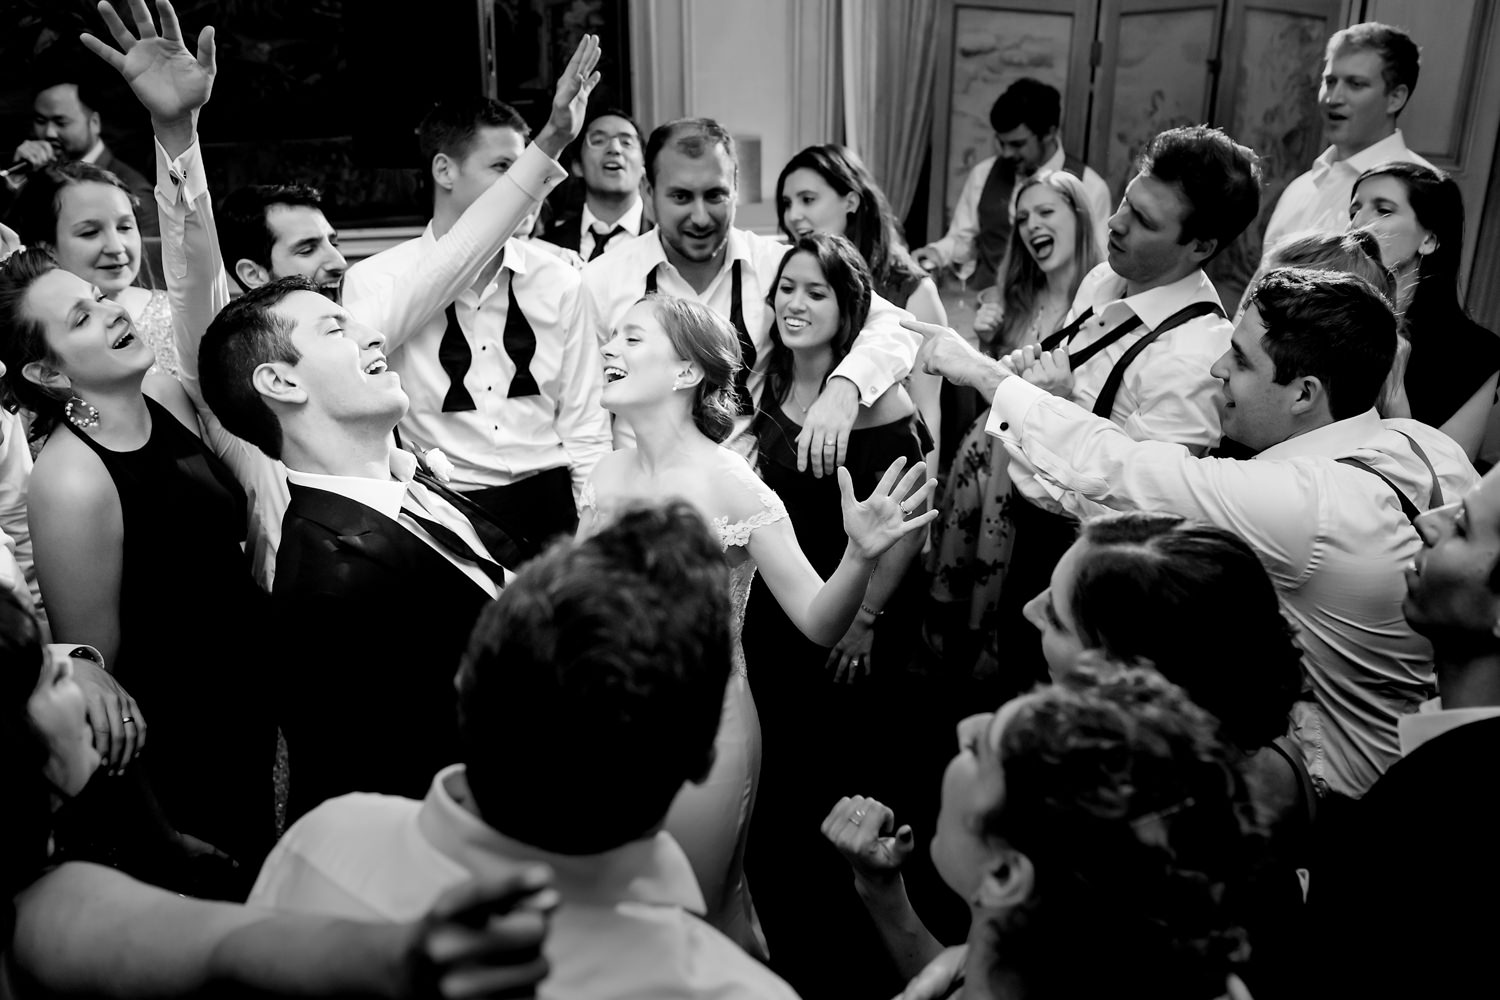 Washington DC wedding at Meridian House, this photo was taken during the second to last dance, the crowd is merry, everyone is singing, a circle forms around the bride and groom as they belt out the lyrics to the song the band is playing loudly, getting their party on, cutting a rug, Procopio Photography, best top Washington DC photographer, best top Maryland photographer, best top Virginia photographer, best top DMV photographer, best top wedding photographer, best top commercial photographer, best top portrait photographer, best top boudoir photographer, modern fine art portraits, dramatic, unique, different, bold, editorial, photojournalism, award winning photographer, published photographer, memorable images, be different, stand out